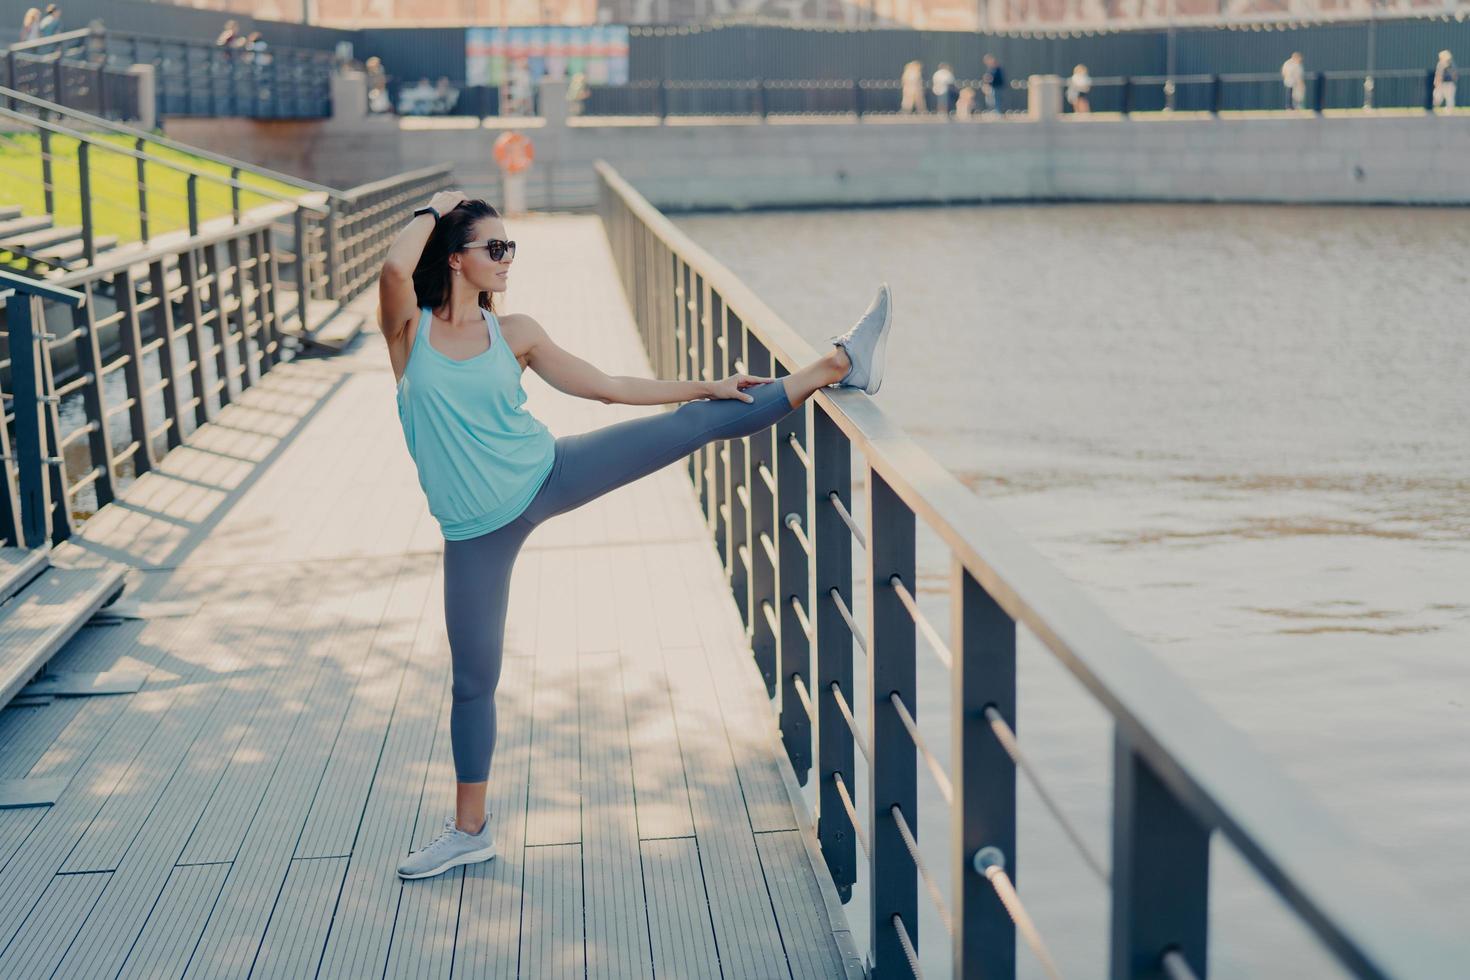 Young fit woman with dark hair stretches legs on fence warms up before jogging wears sunglasses t shirt leggings and sneakers prepares for cardio training poses outdoor being in good physical shape photo